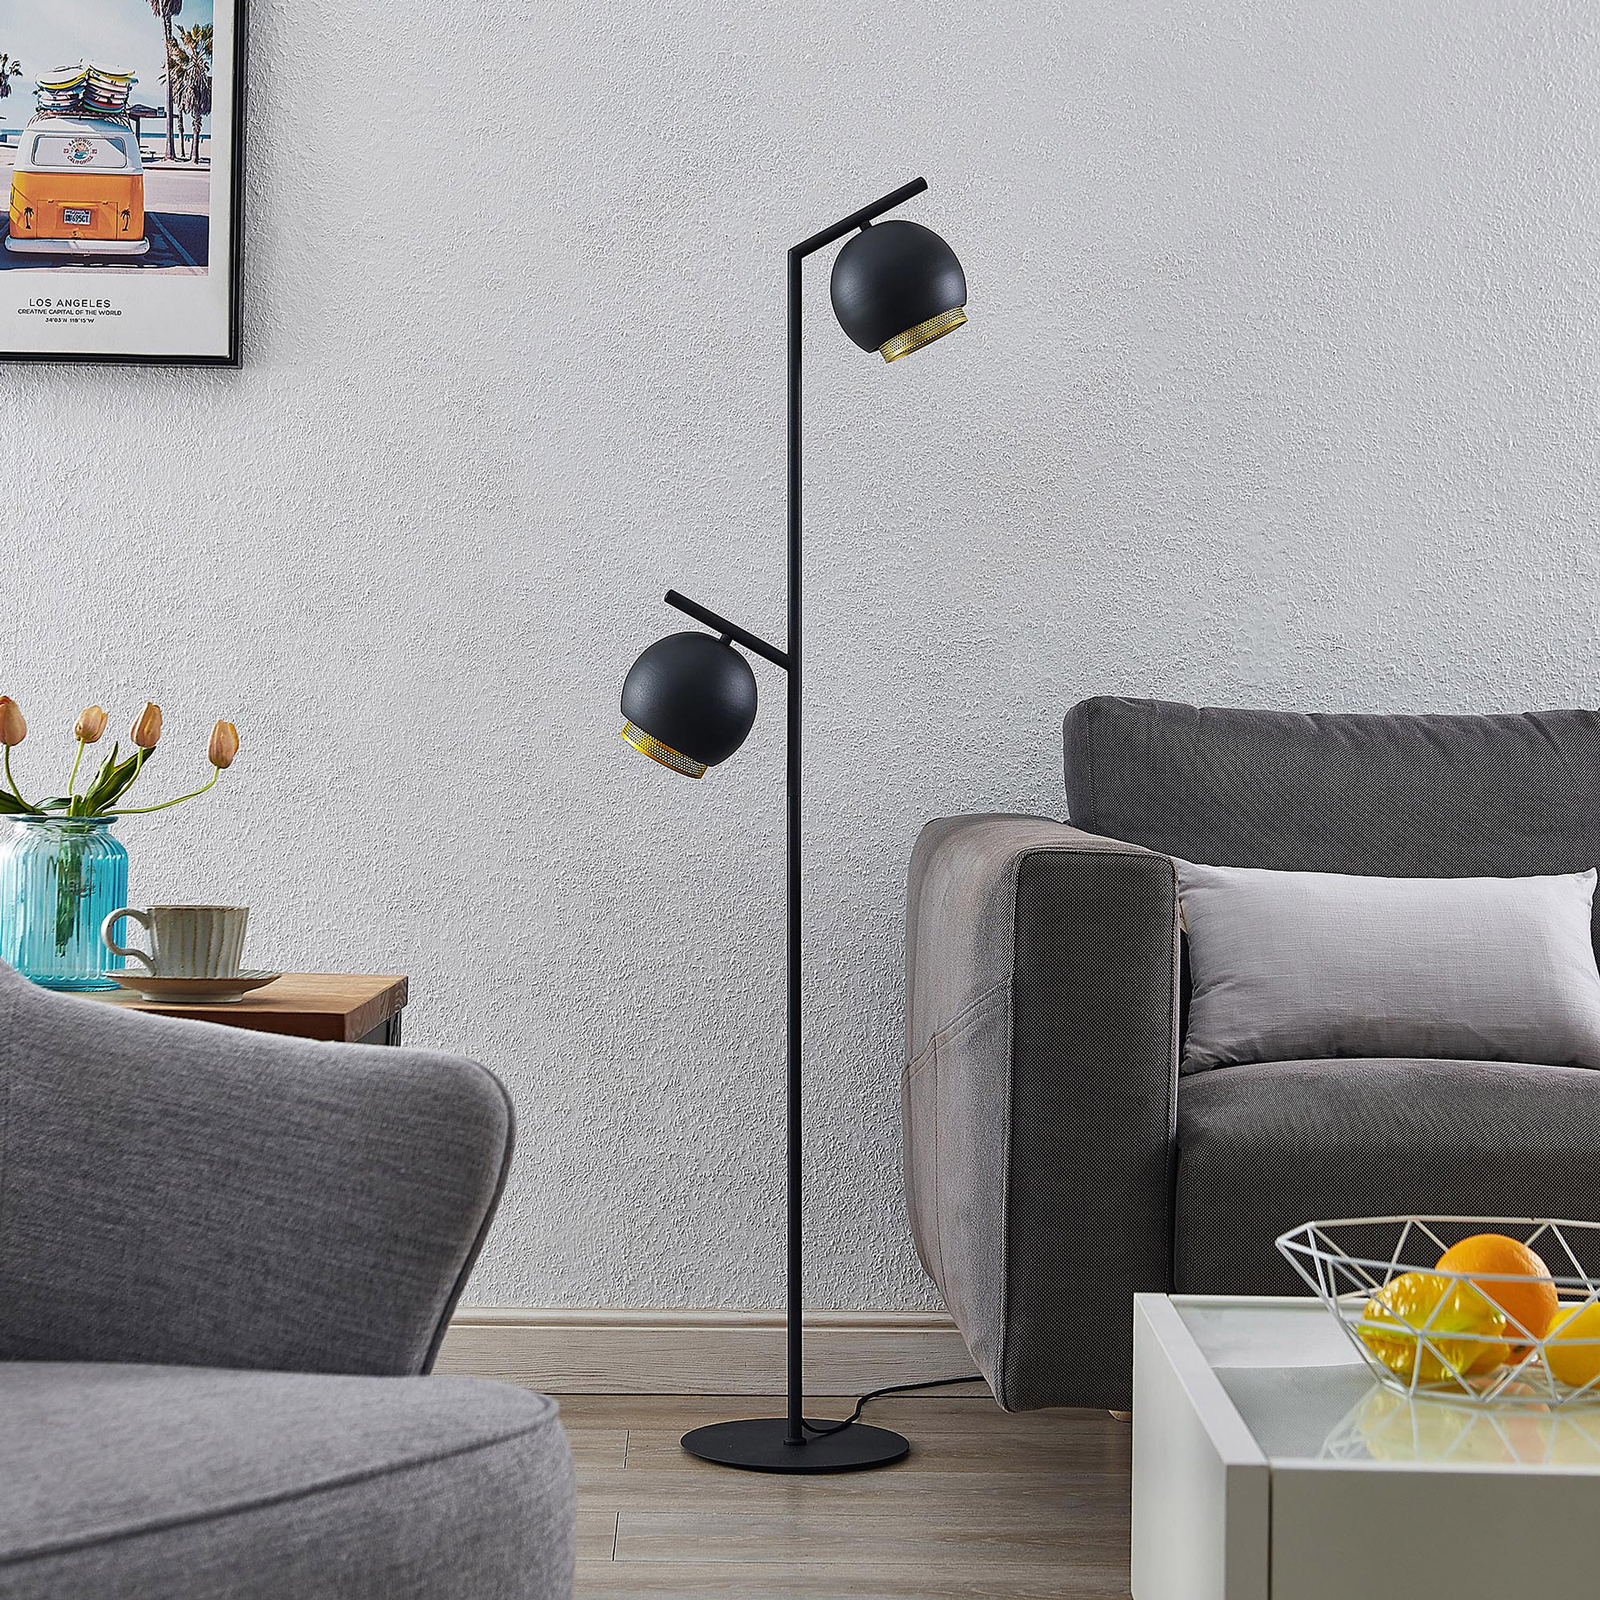 Lucande Sivanel floor lamp with two lampshades